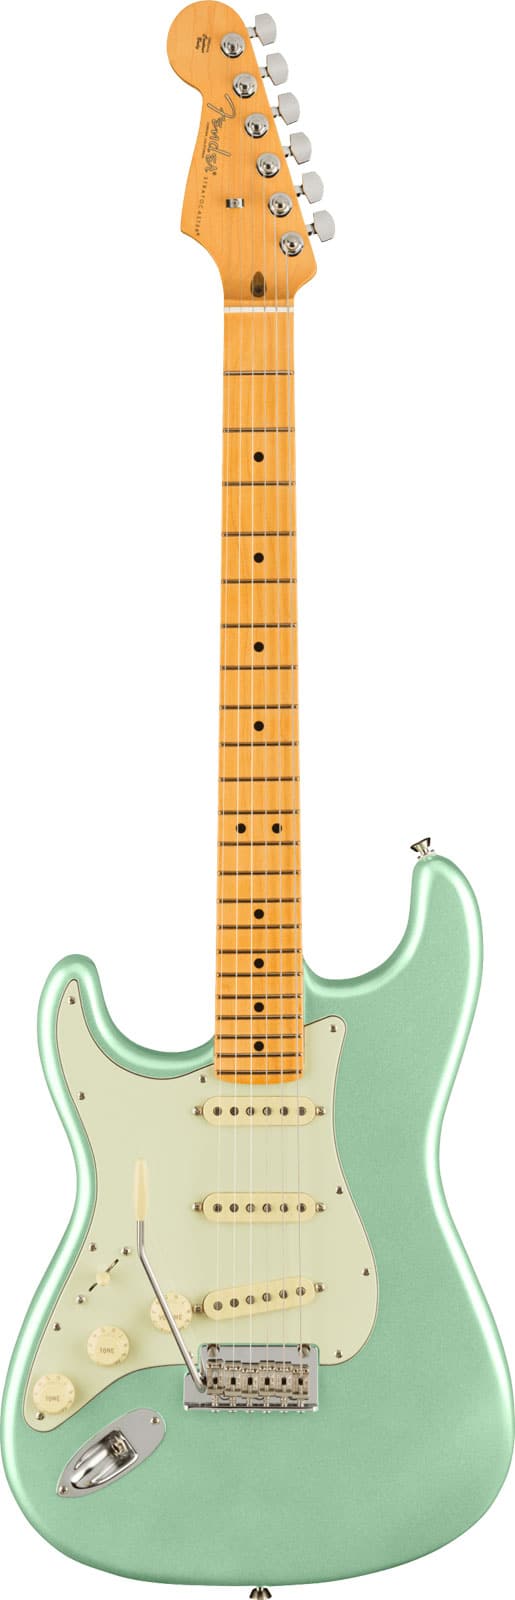 FENDER AMERICAN PROFESSIONAL II STRATOCASTER LH MN, MYSTIC SURF GREEN